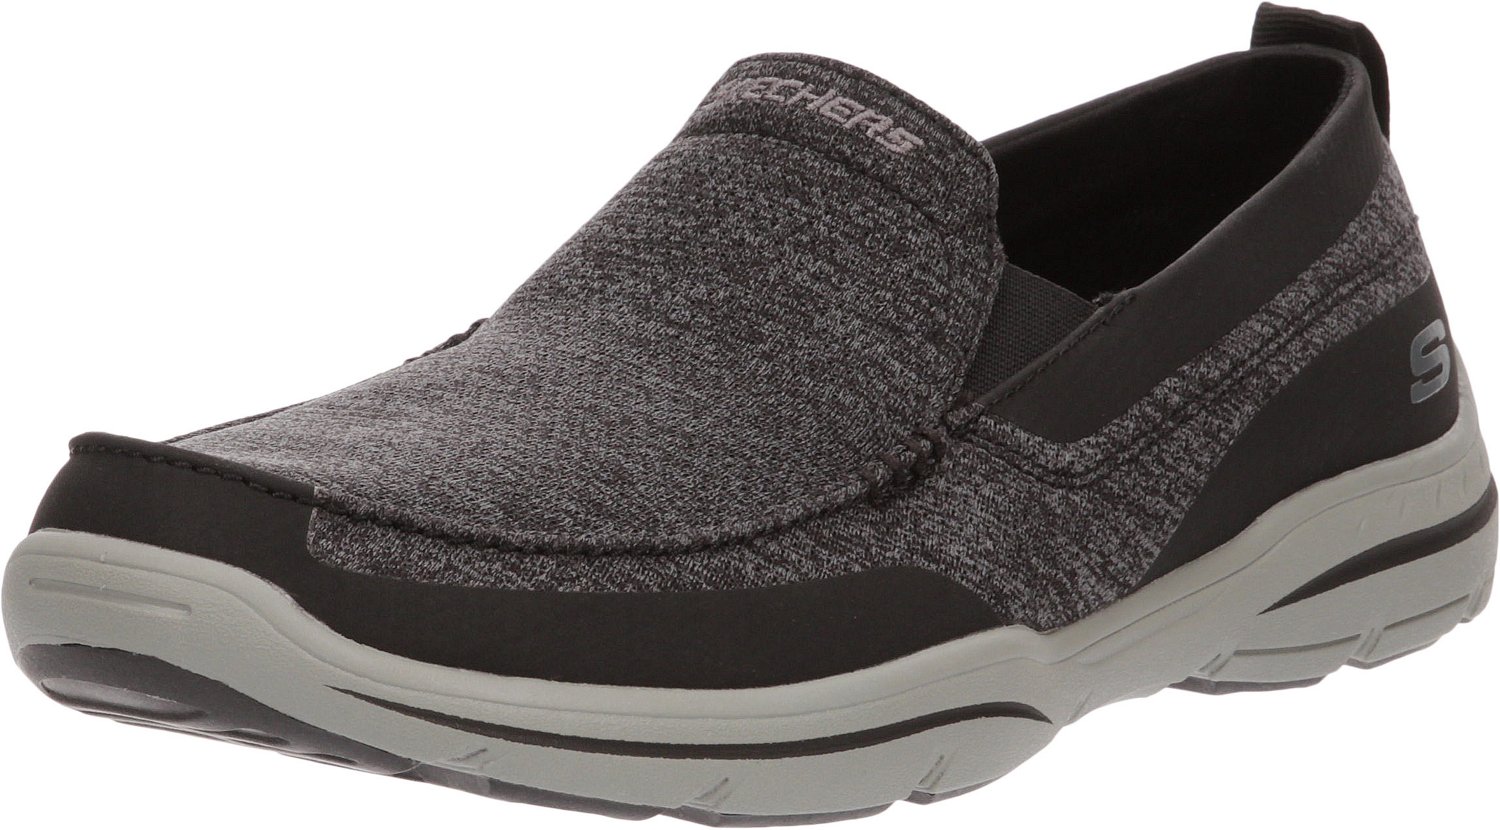 skechers classic fit with air cooled memory foam